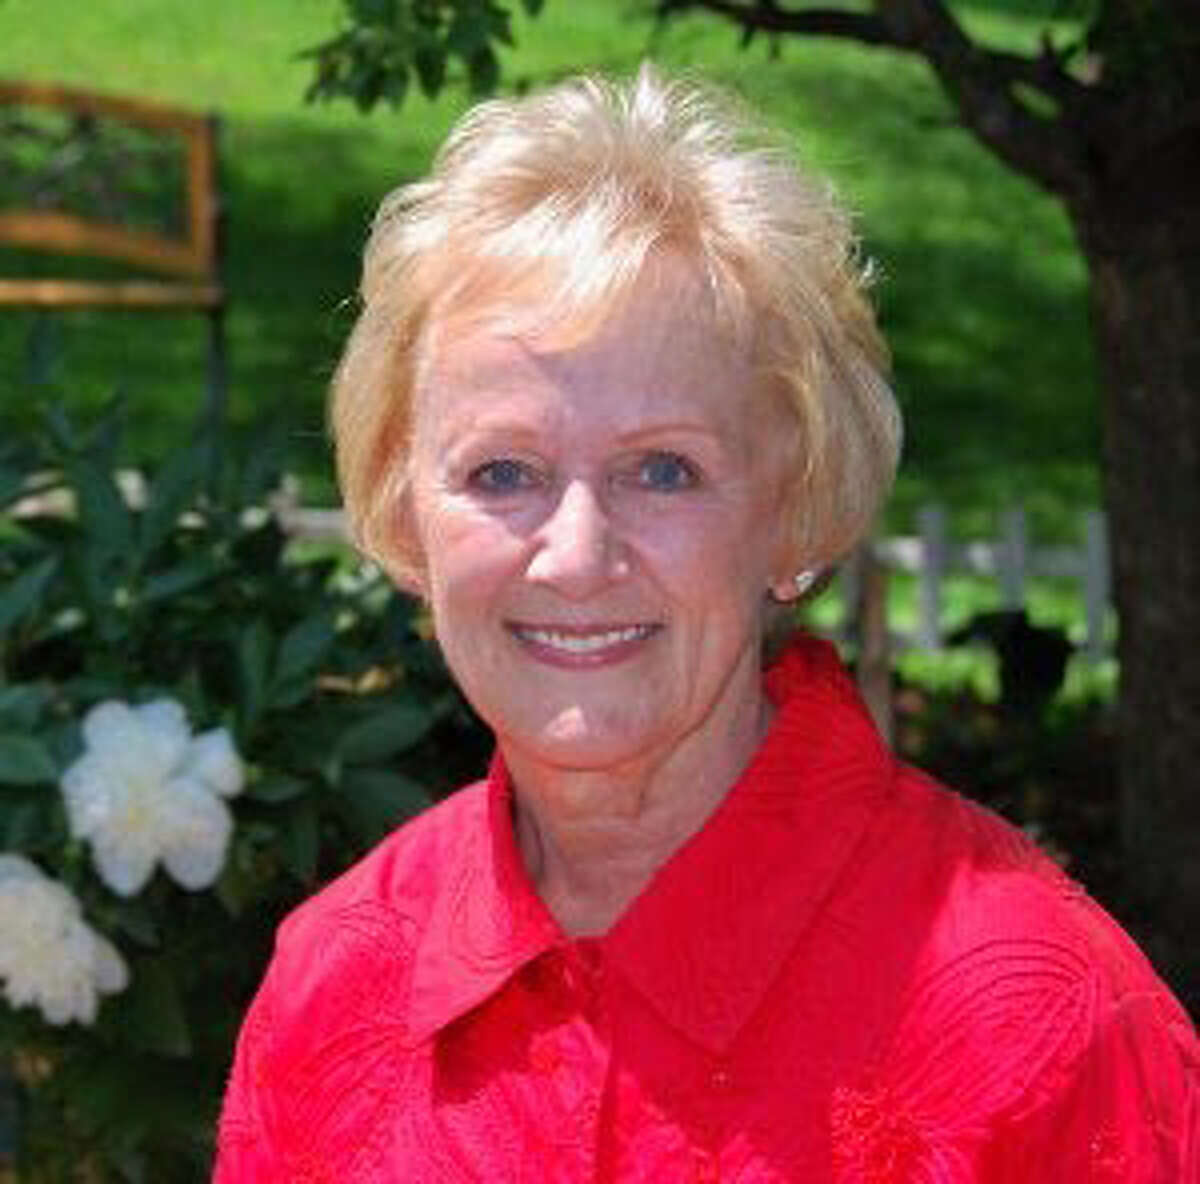 Patricia Llodra, First Selectman of the Town of Newtown